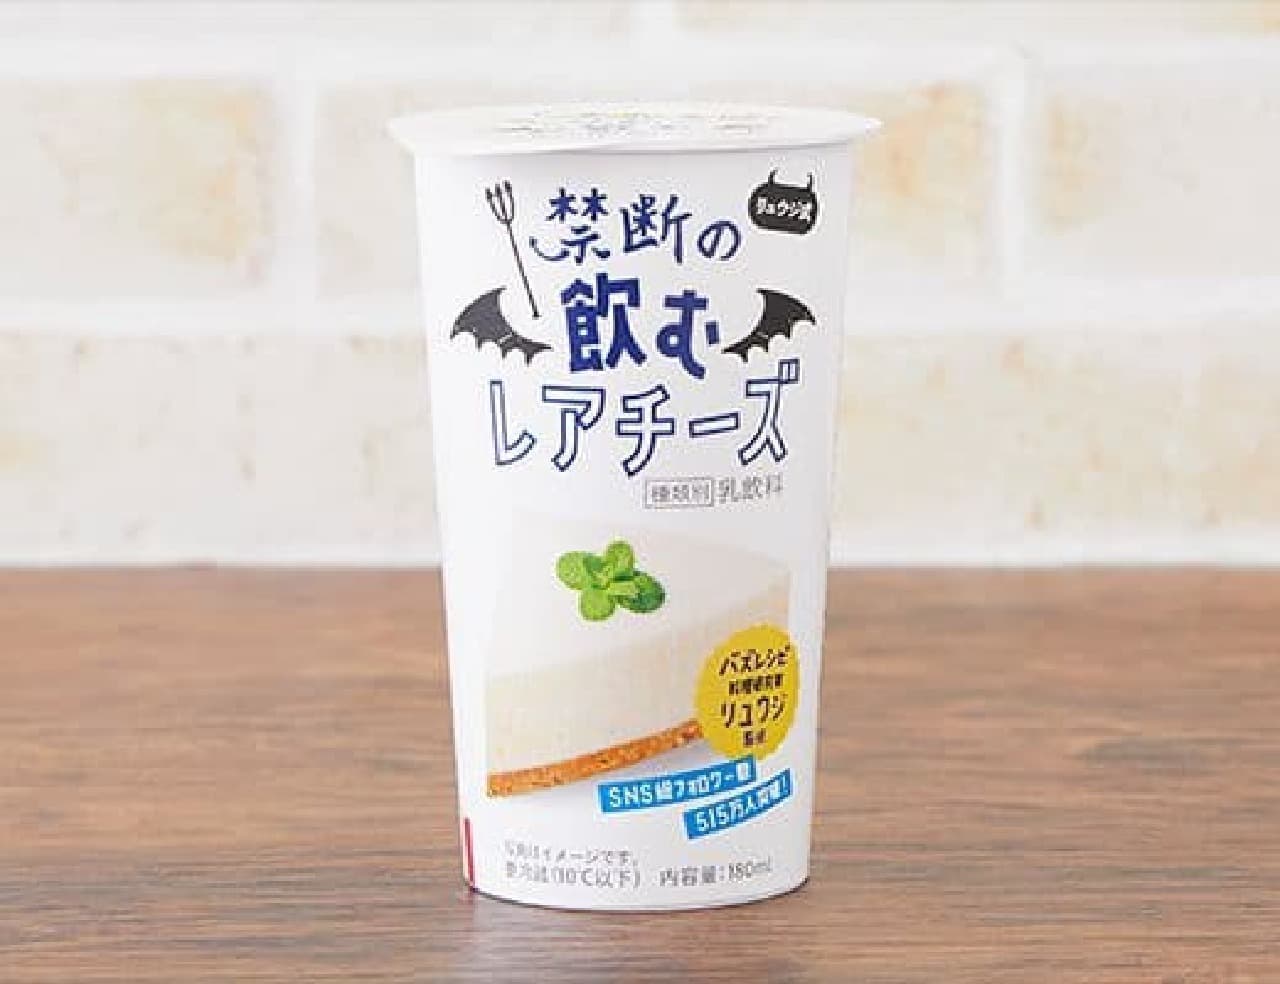 Lawson "Supervised by Ryuji Forbidden Drinking Rare Cheese 180ml"